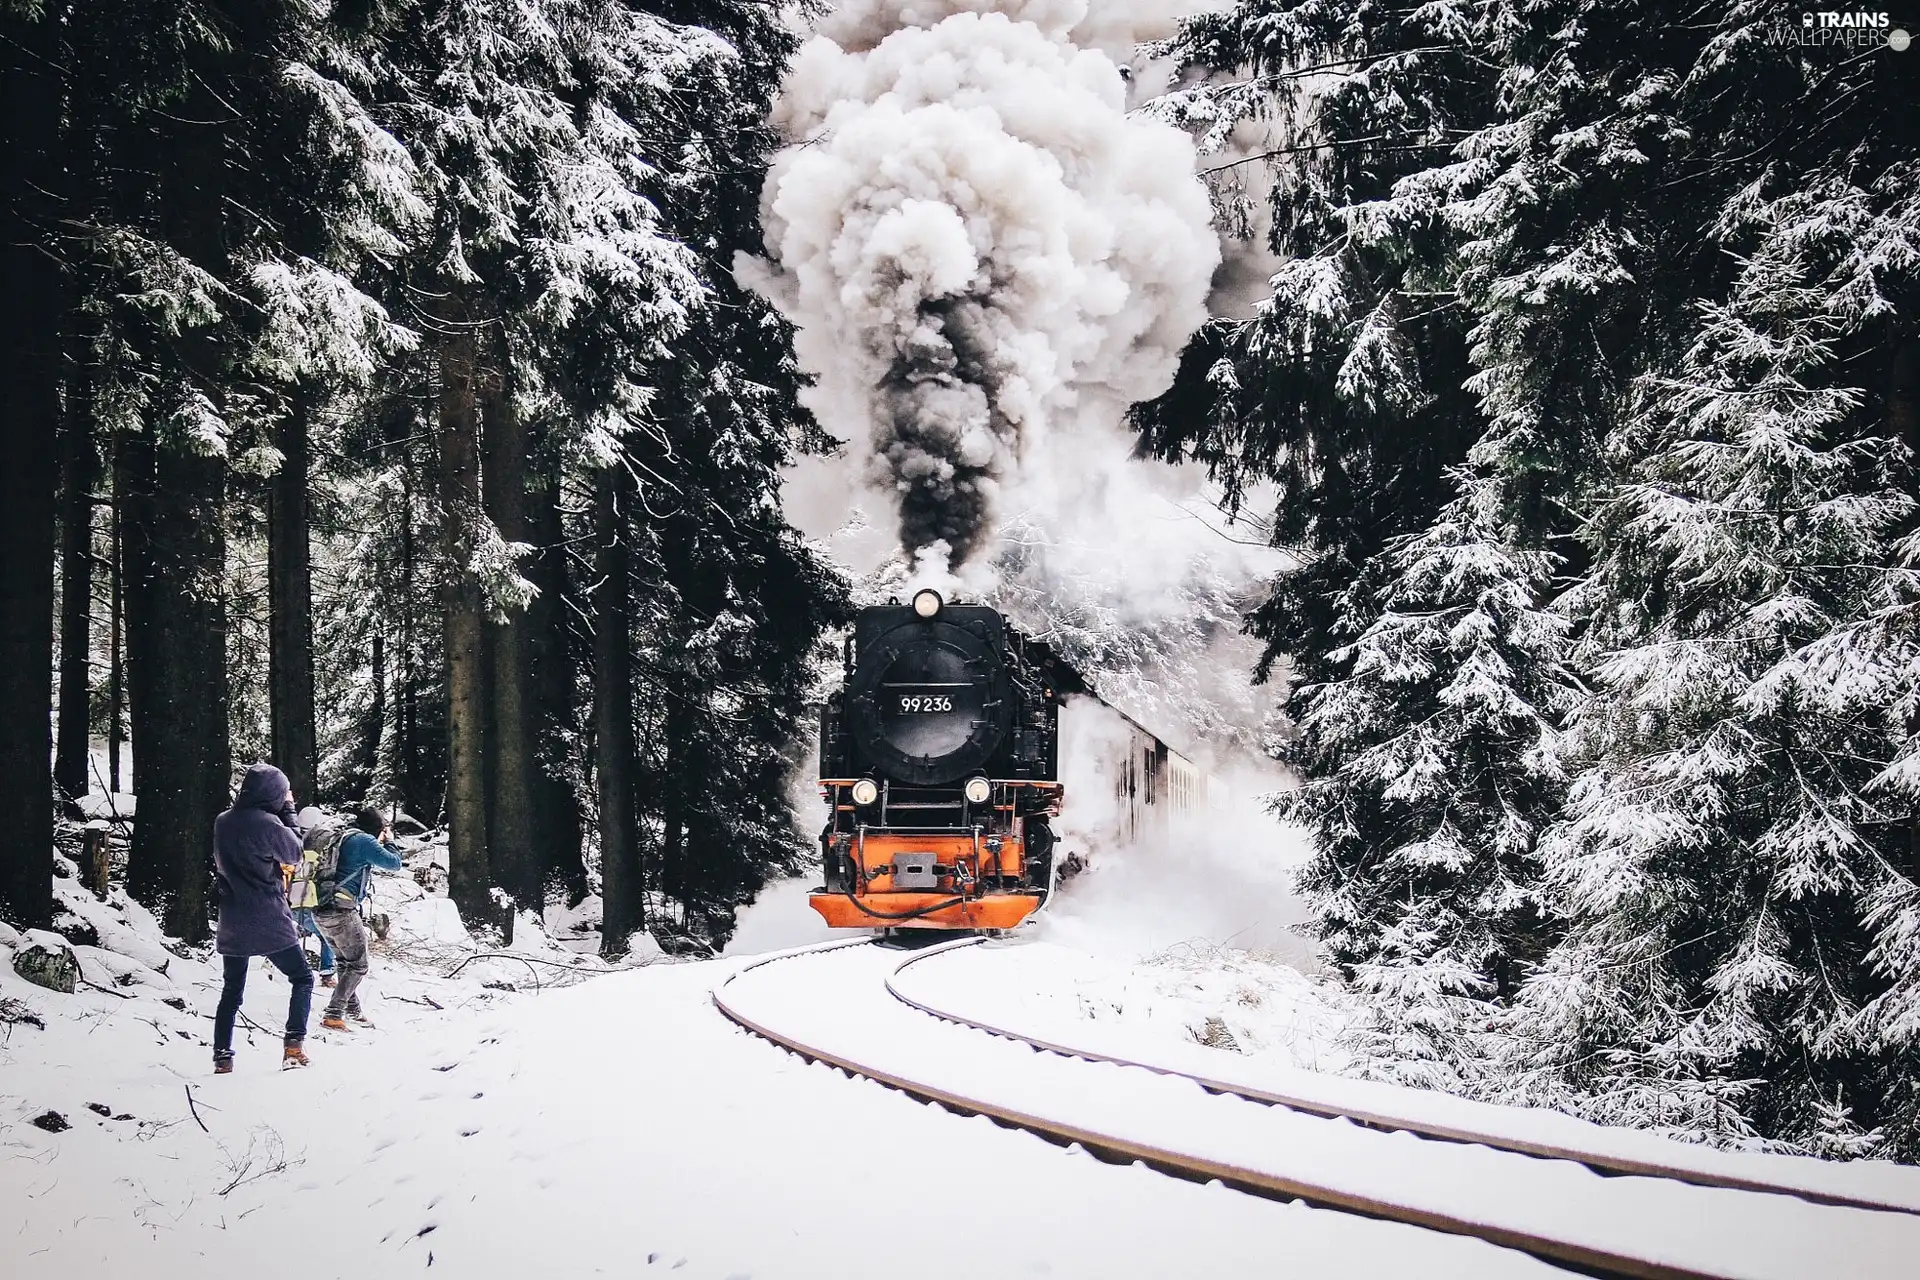 https://www.trains-wallpapers.com/trains/snow-train-winter-people-forest.jpg